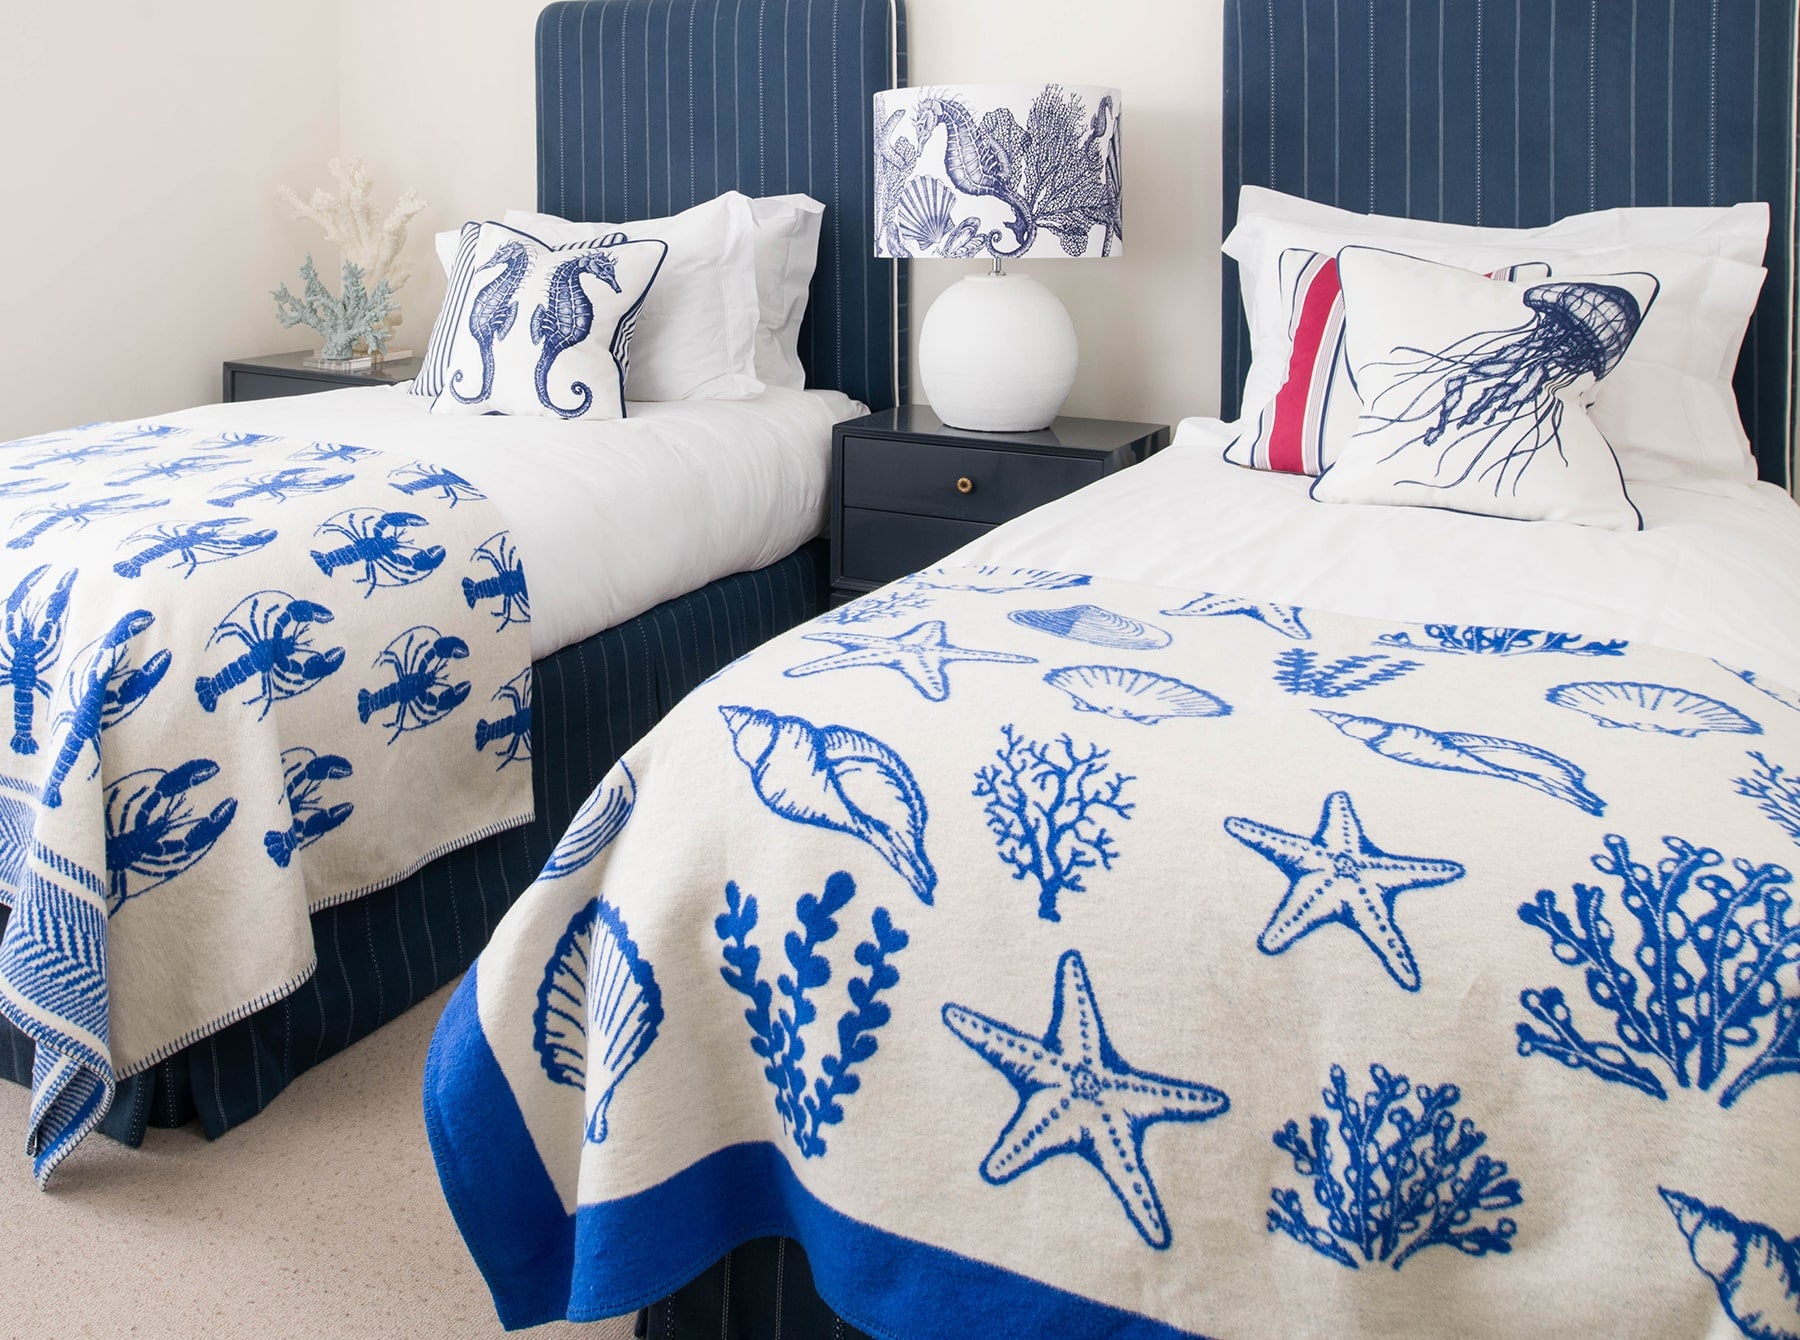 Our Classic Navy Seahorse design on a white background on a white lampbase on a side table between two single beds.On the beds are classic Navy and White cushions and our reversible throws are draped over the ends of the beds.